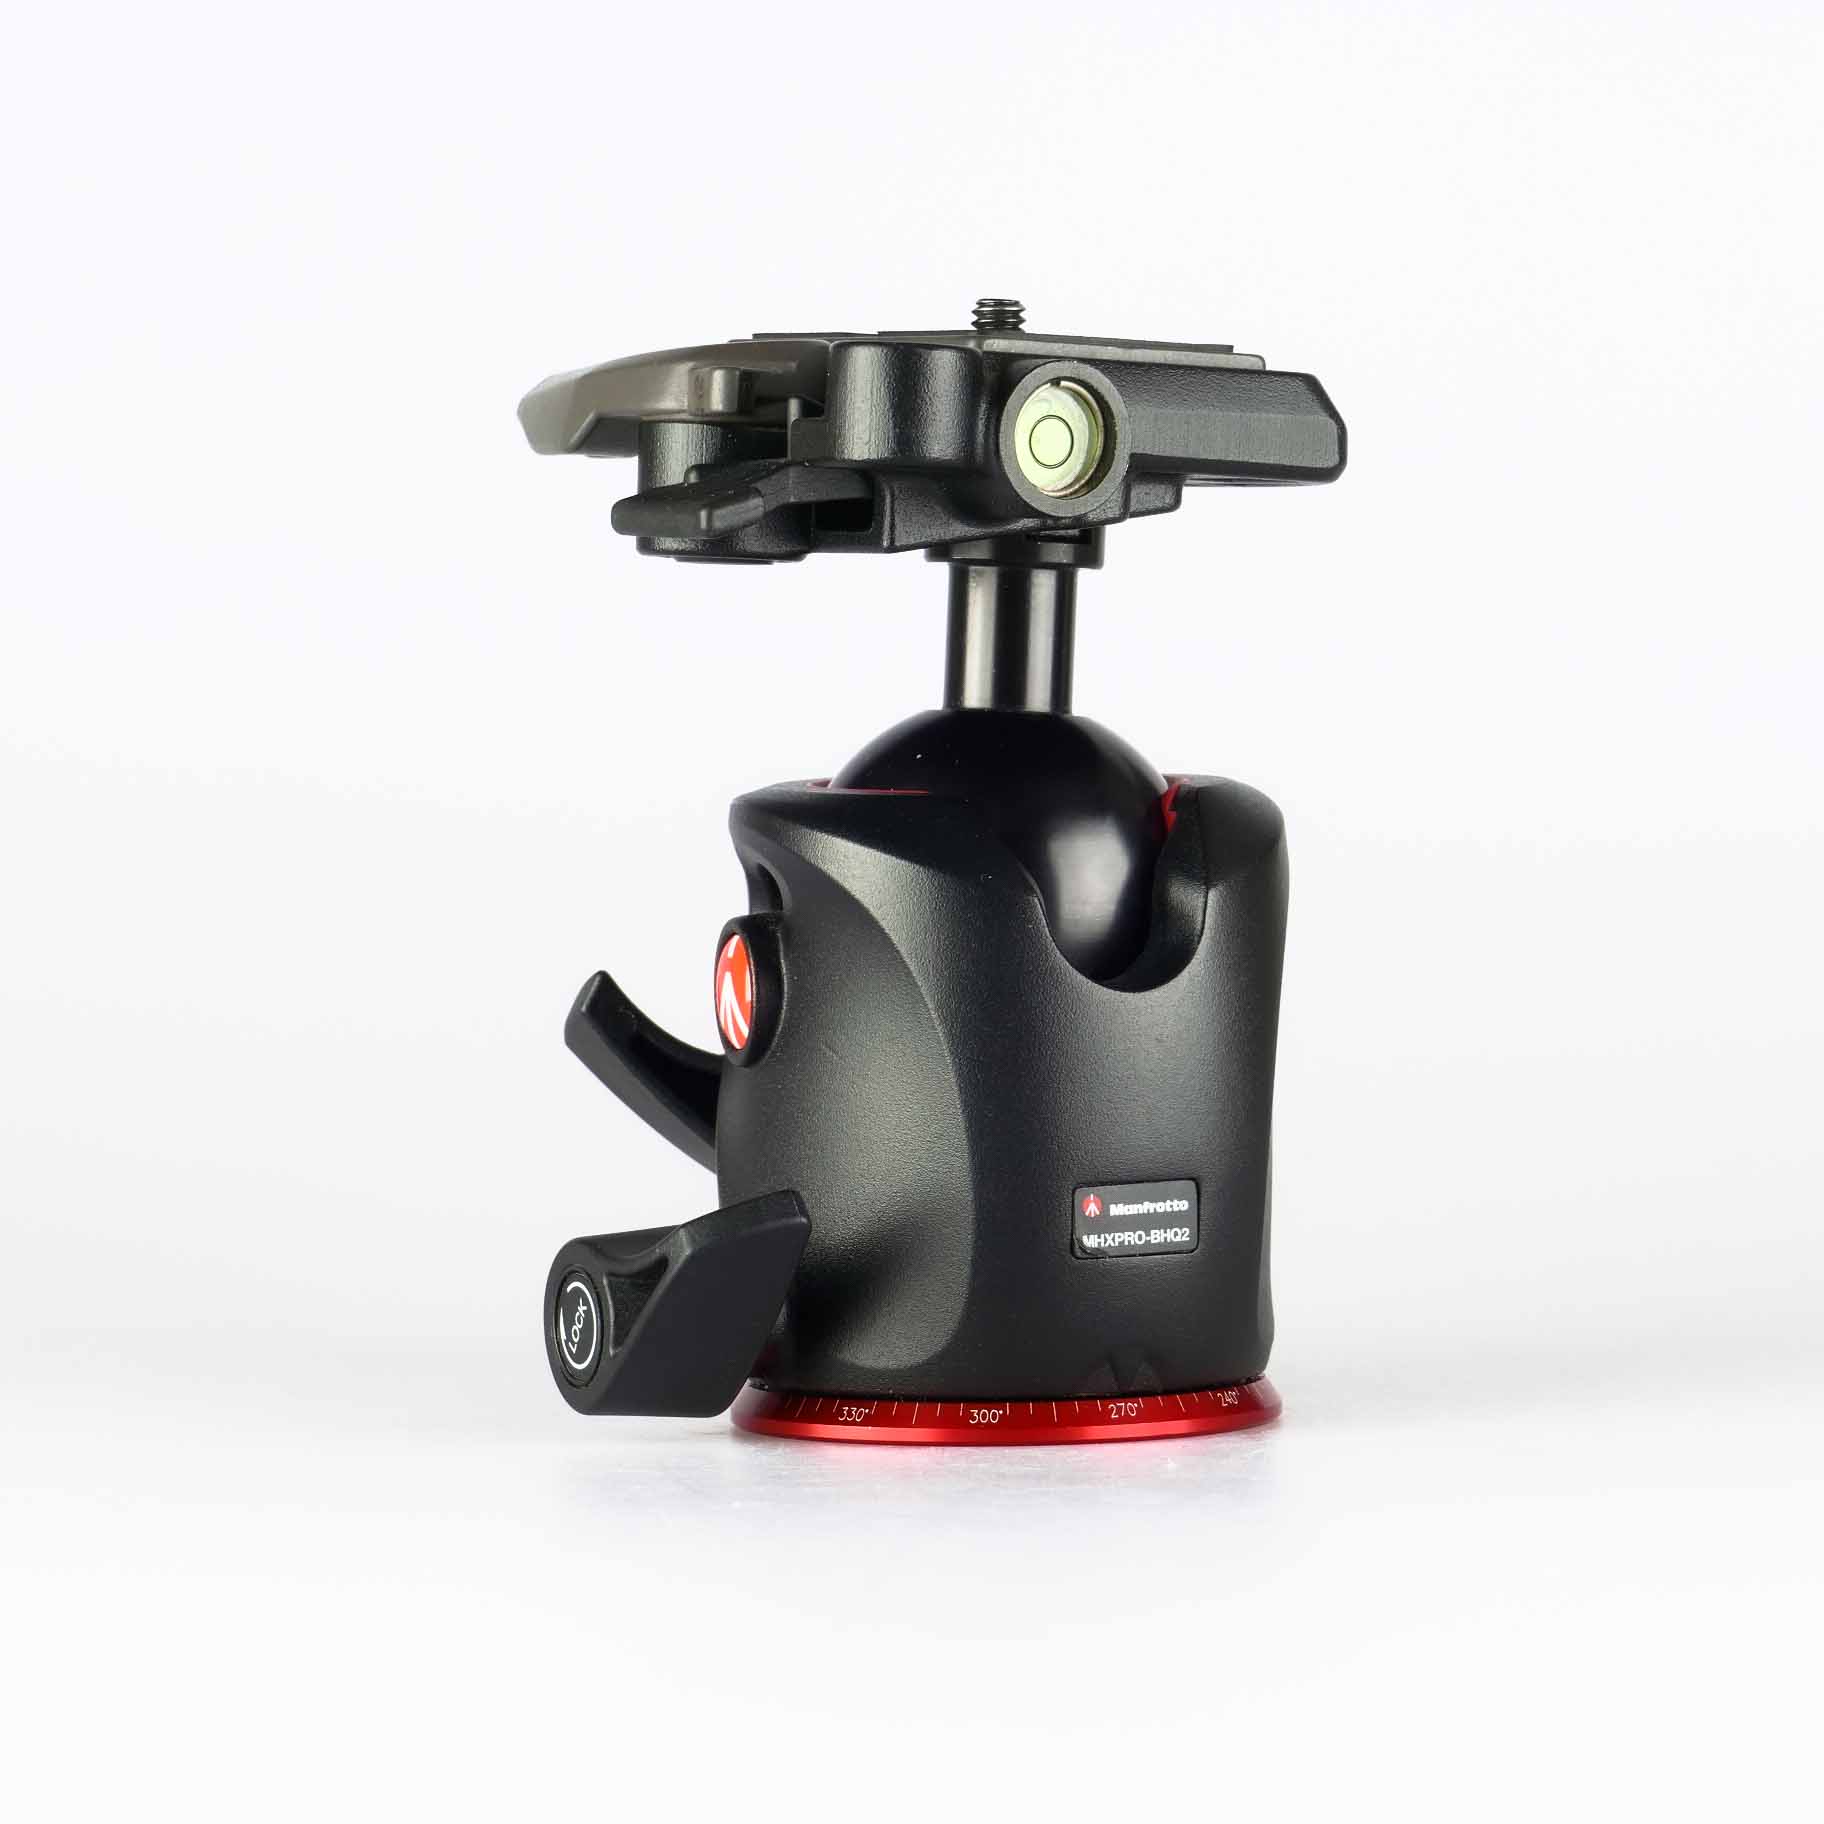 Manfrotto MHXPRO-BHQ2 Голова штативная